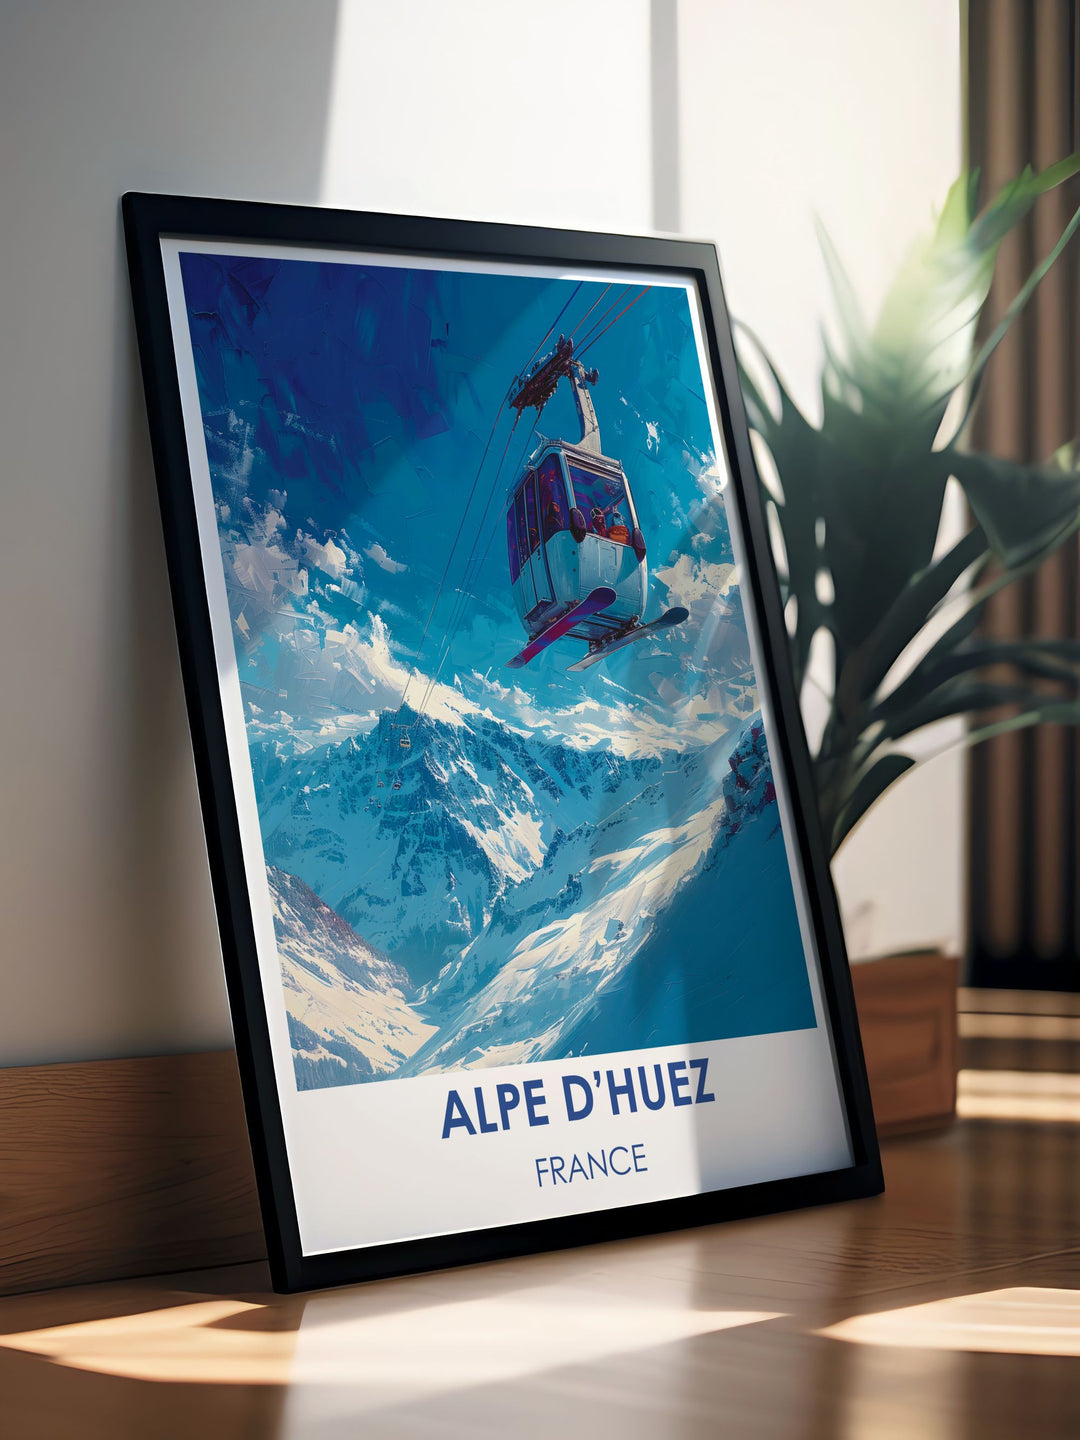 Exclusive France posters depicting the scenic vistas and ski culture of the French Alps, great for decorating a home or office.